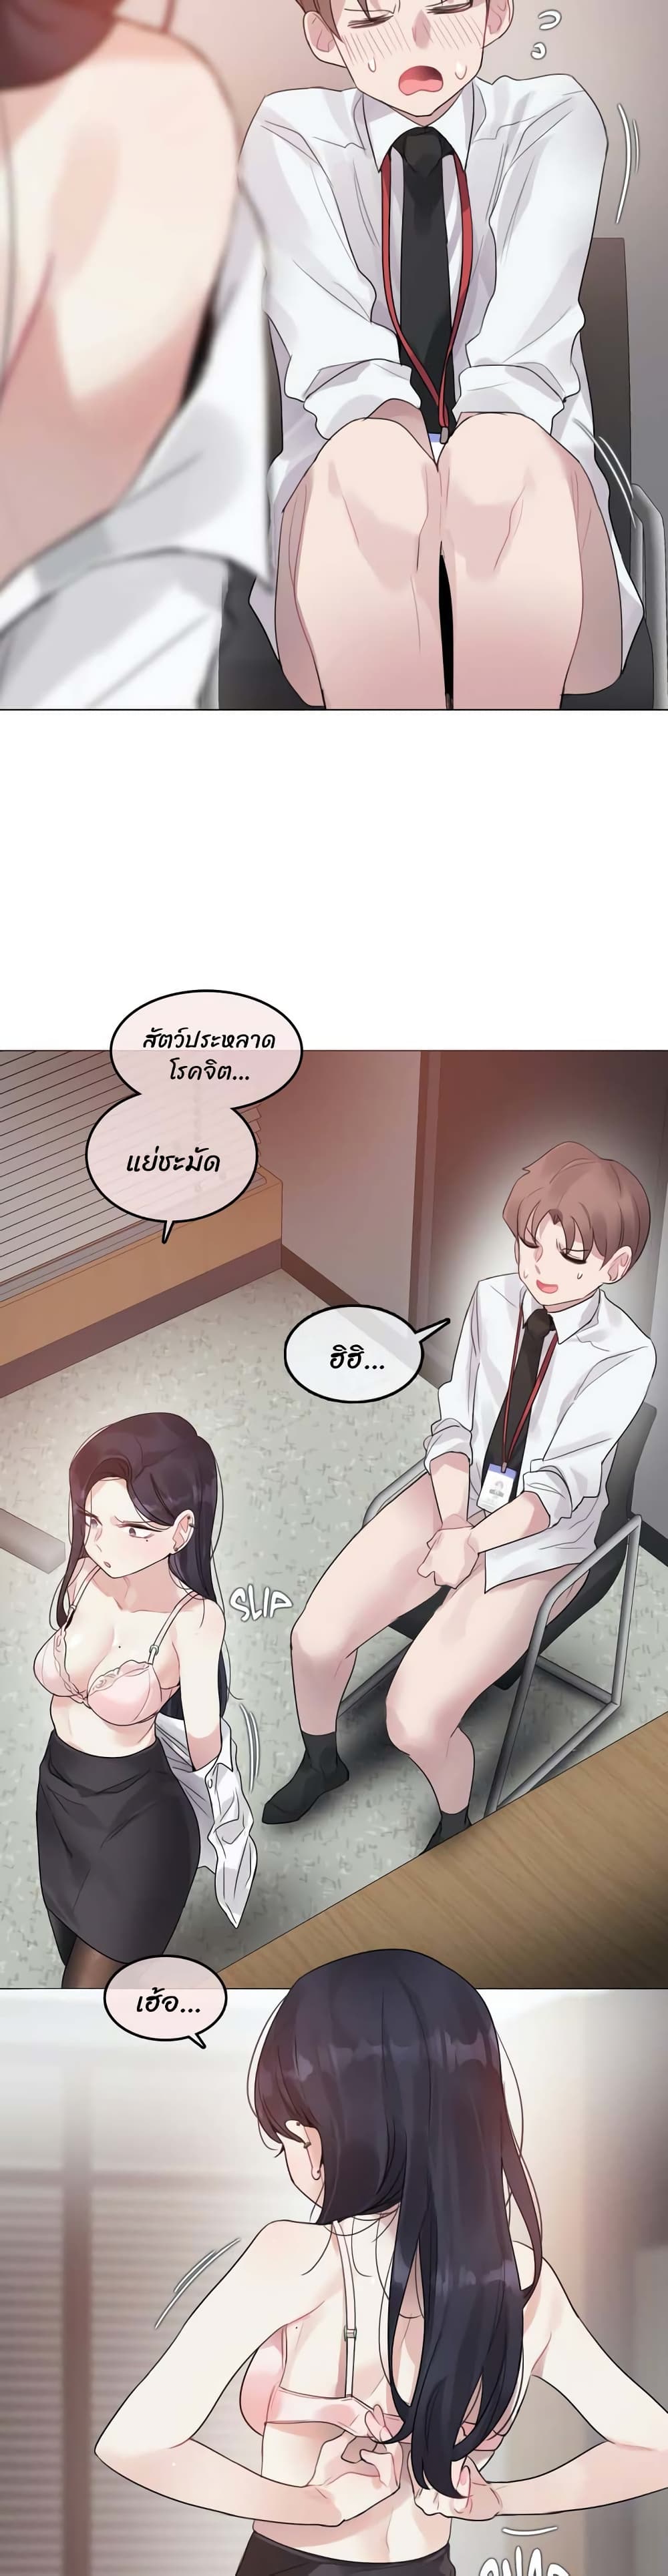 A Pervert's Daily Life 97 05